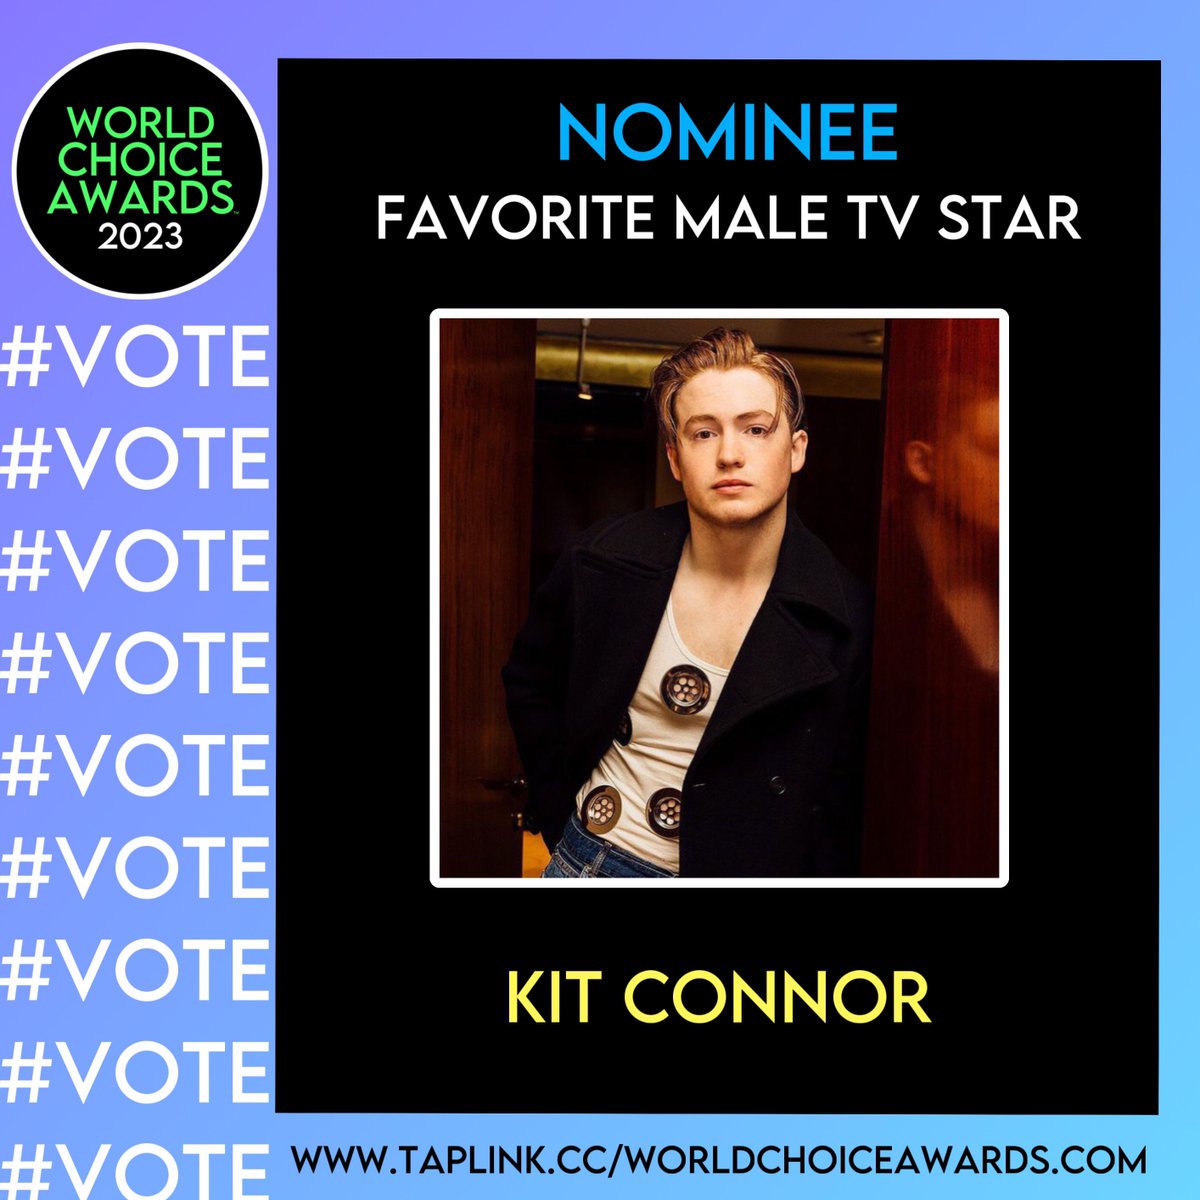 #WorldChoiceAwards 2023 #nominee 

Favorite Male Actor

Kit Connor 

Tap the link in our Bio to Vote Now!!!

#vote #favorite #maleactor #awards #kitconnor